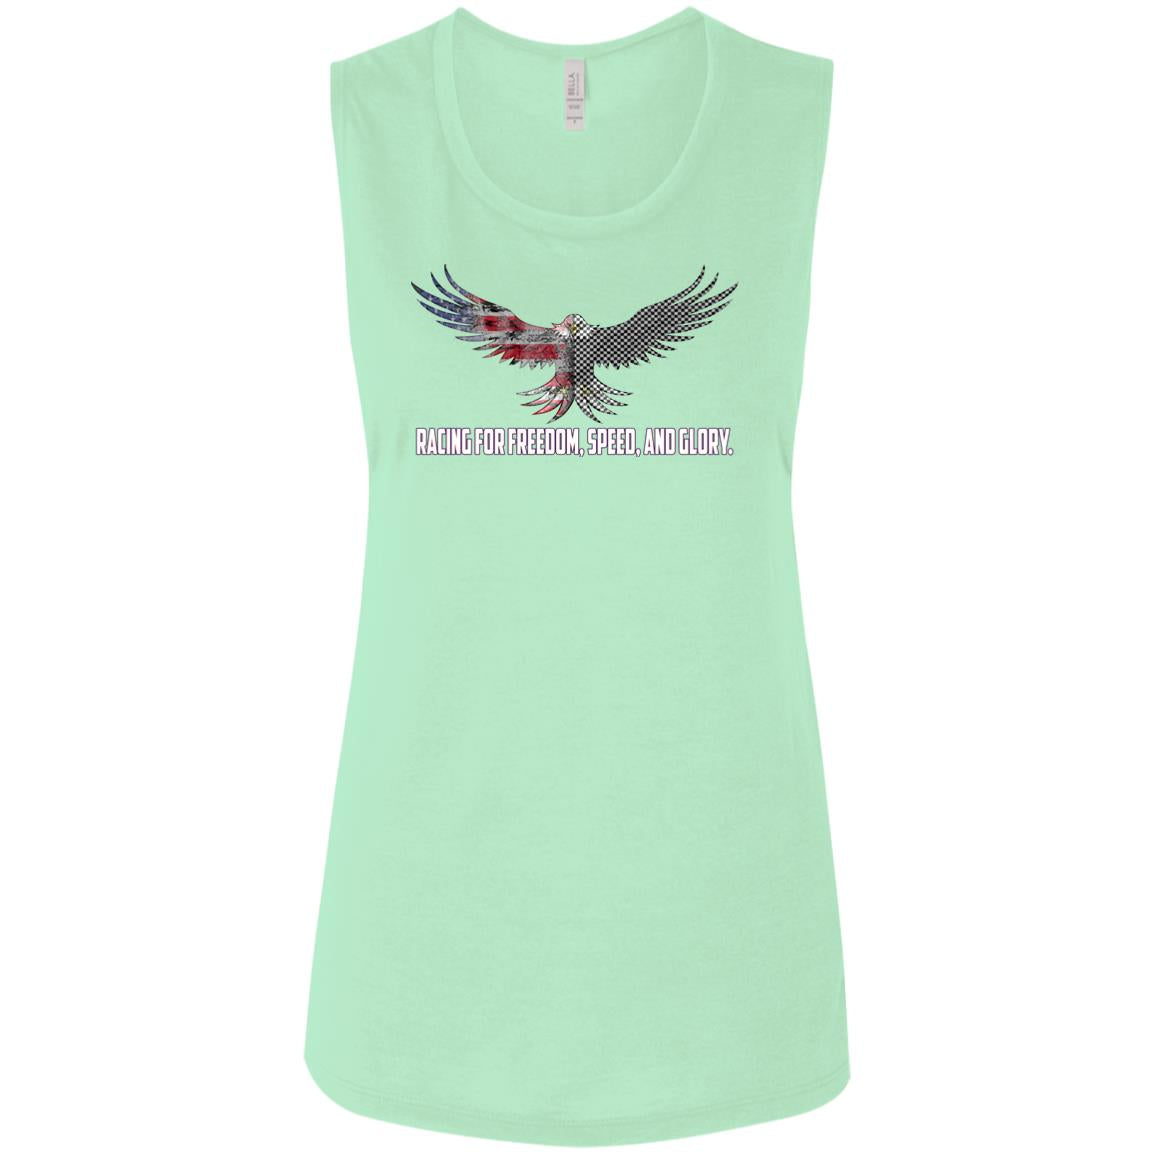 Racing For Freedom, Speed, And Glory Ladies' Flowy Muscle Tank